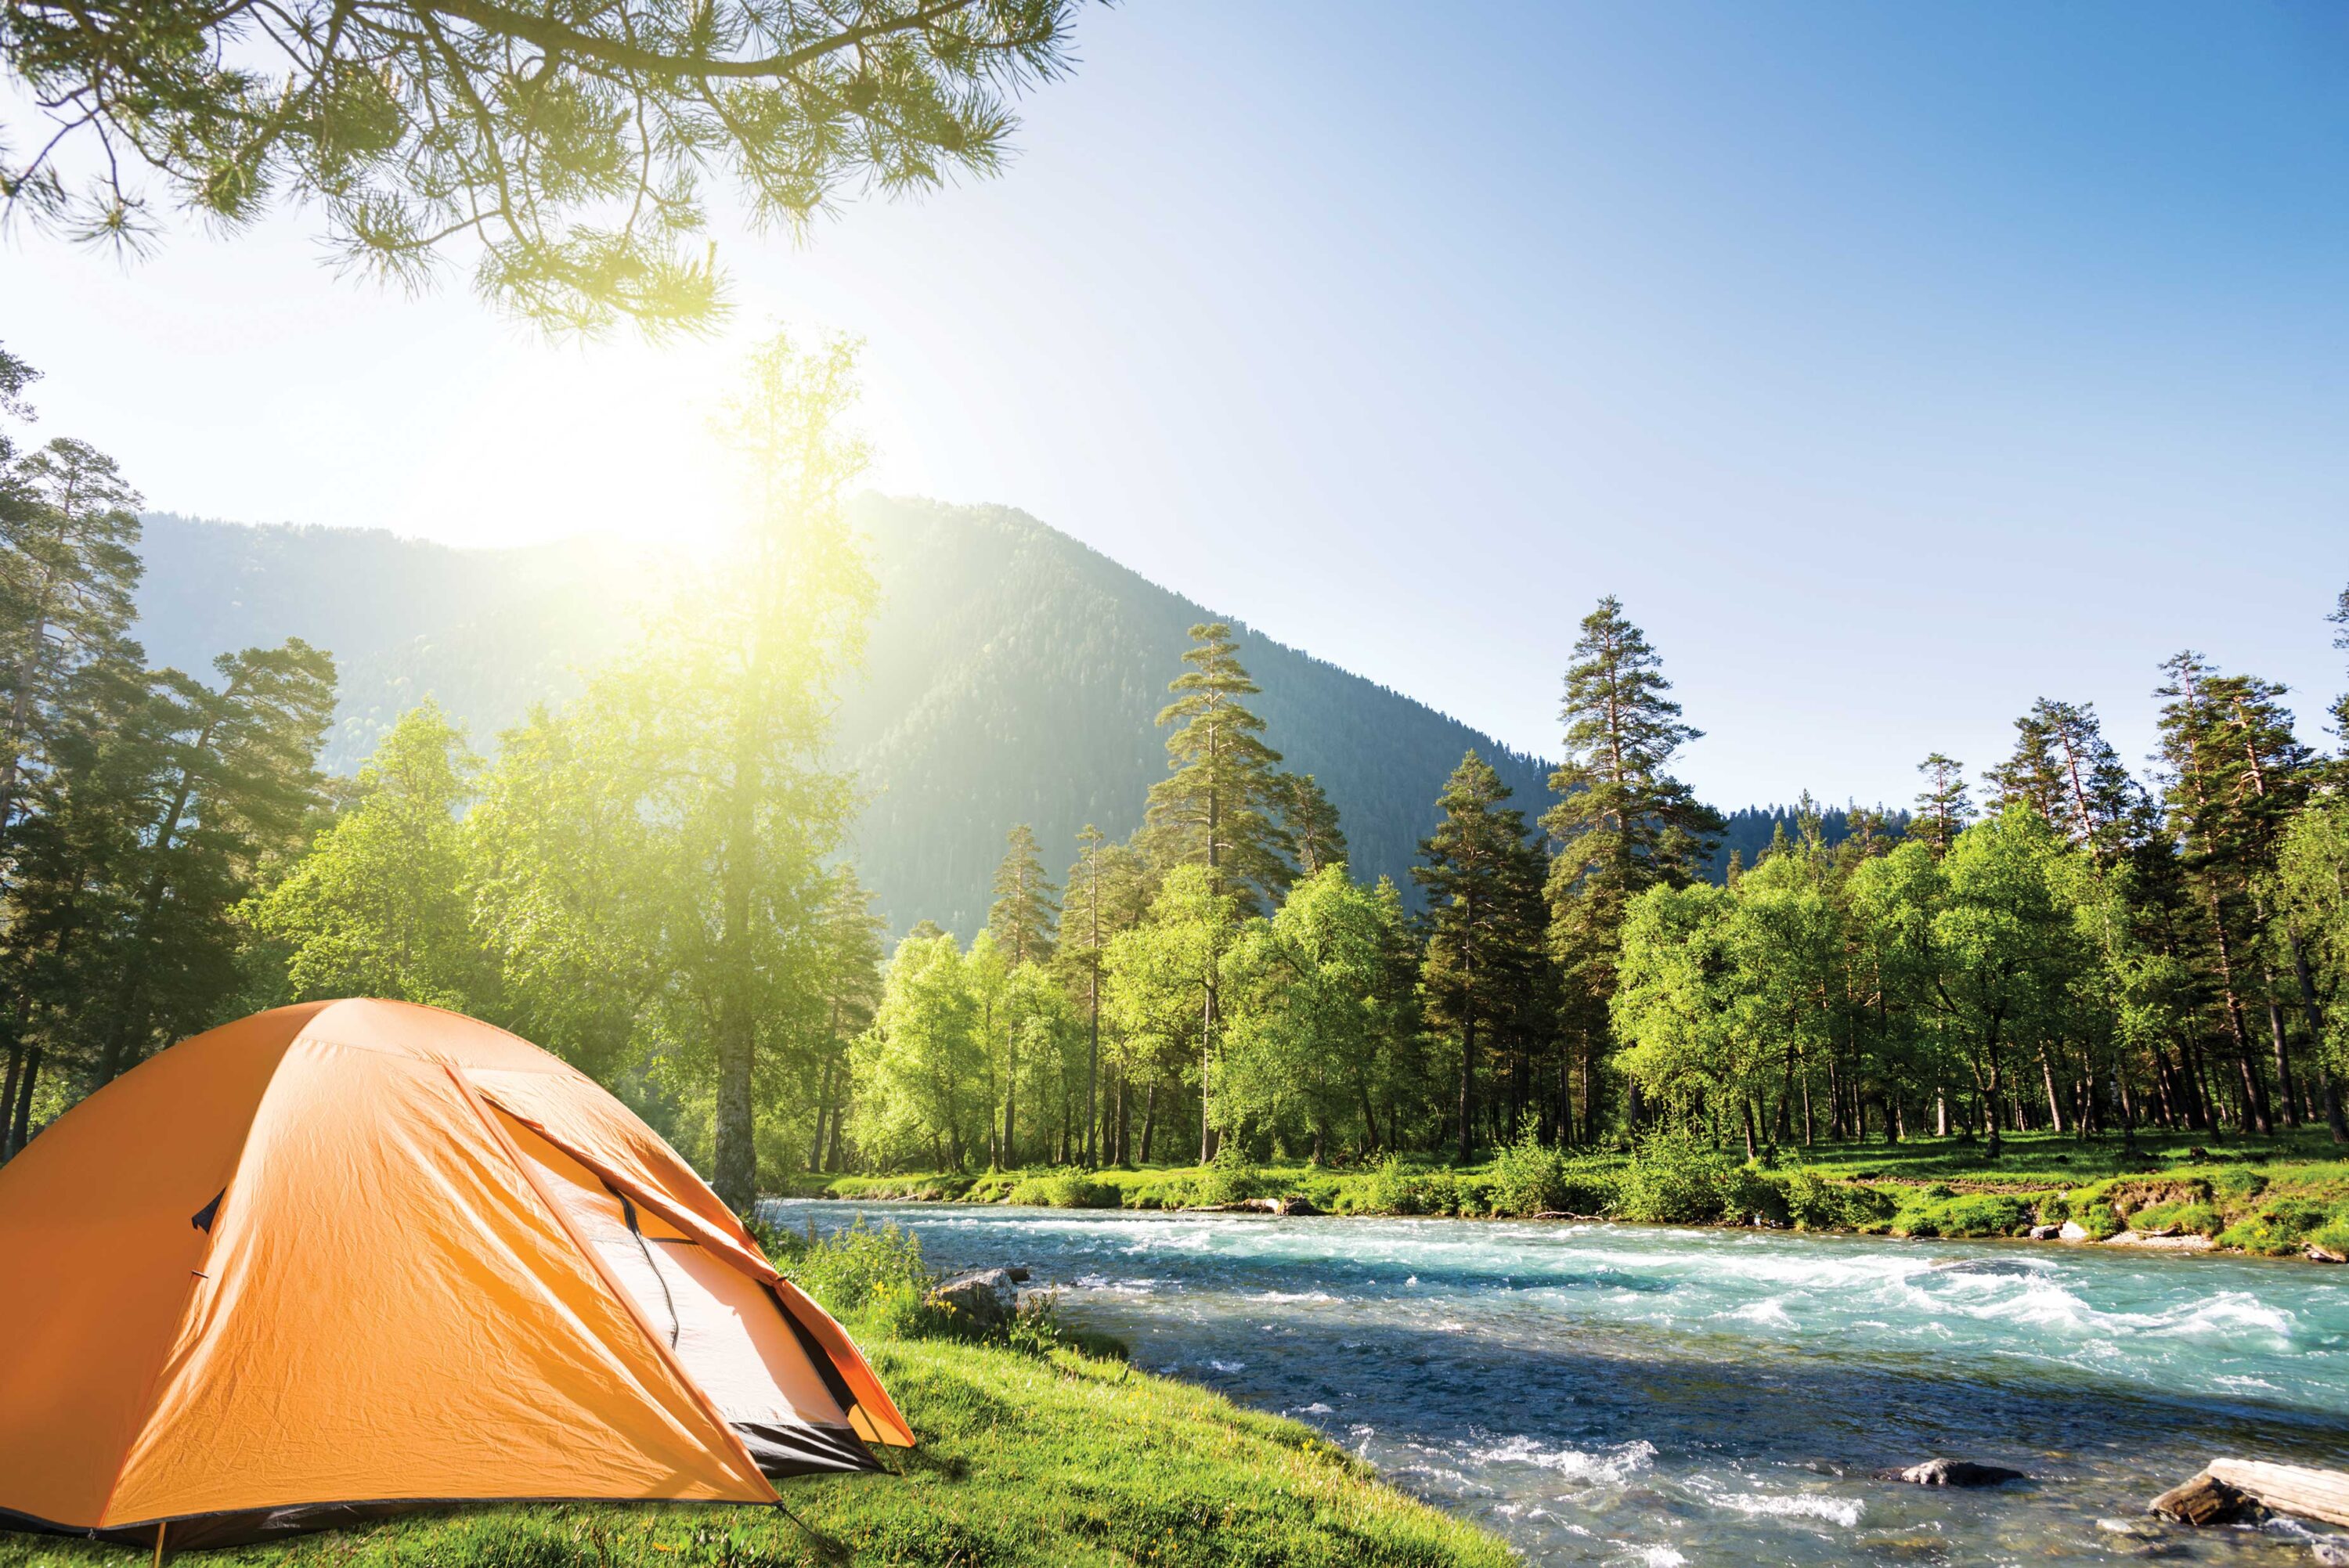 Brightly colored tent sets next to a swiftly flowing body of water lined with bright green trees.